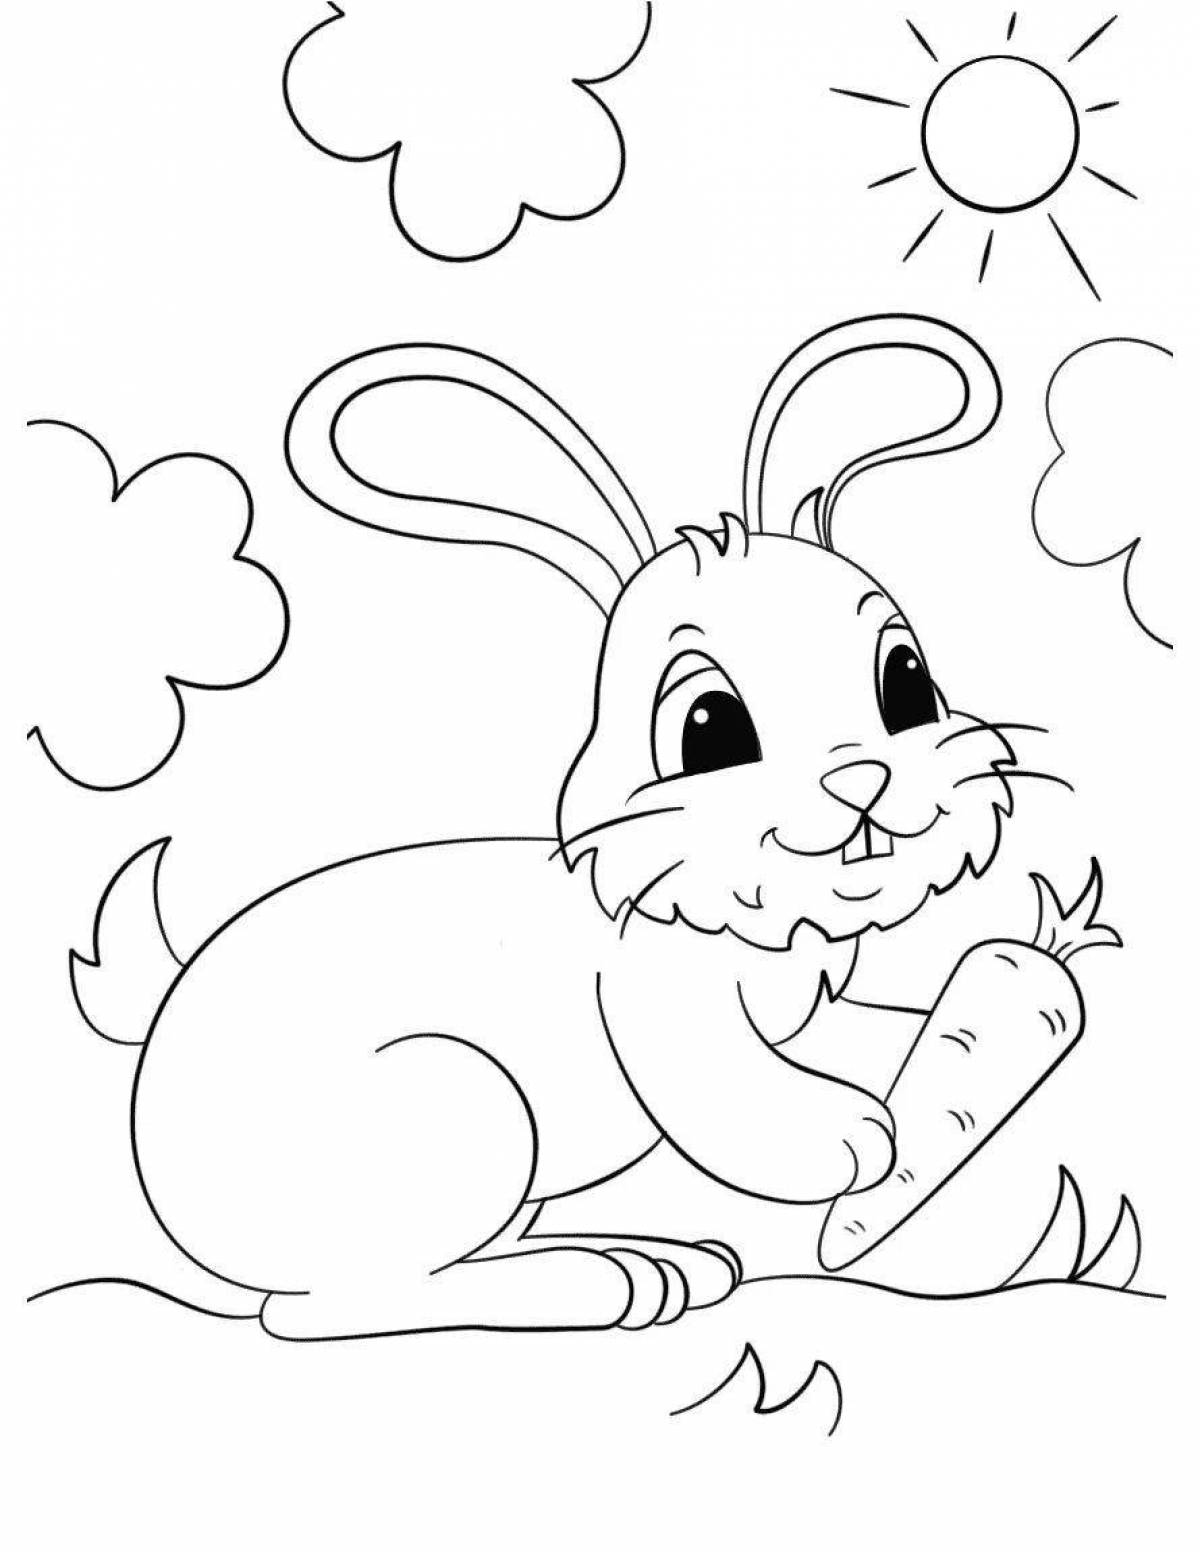 Coloring page cute hare with a carrot